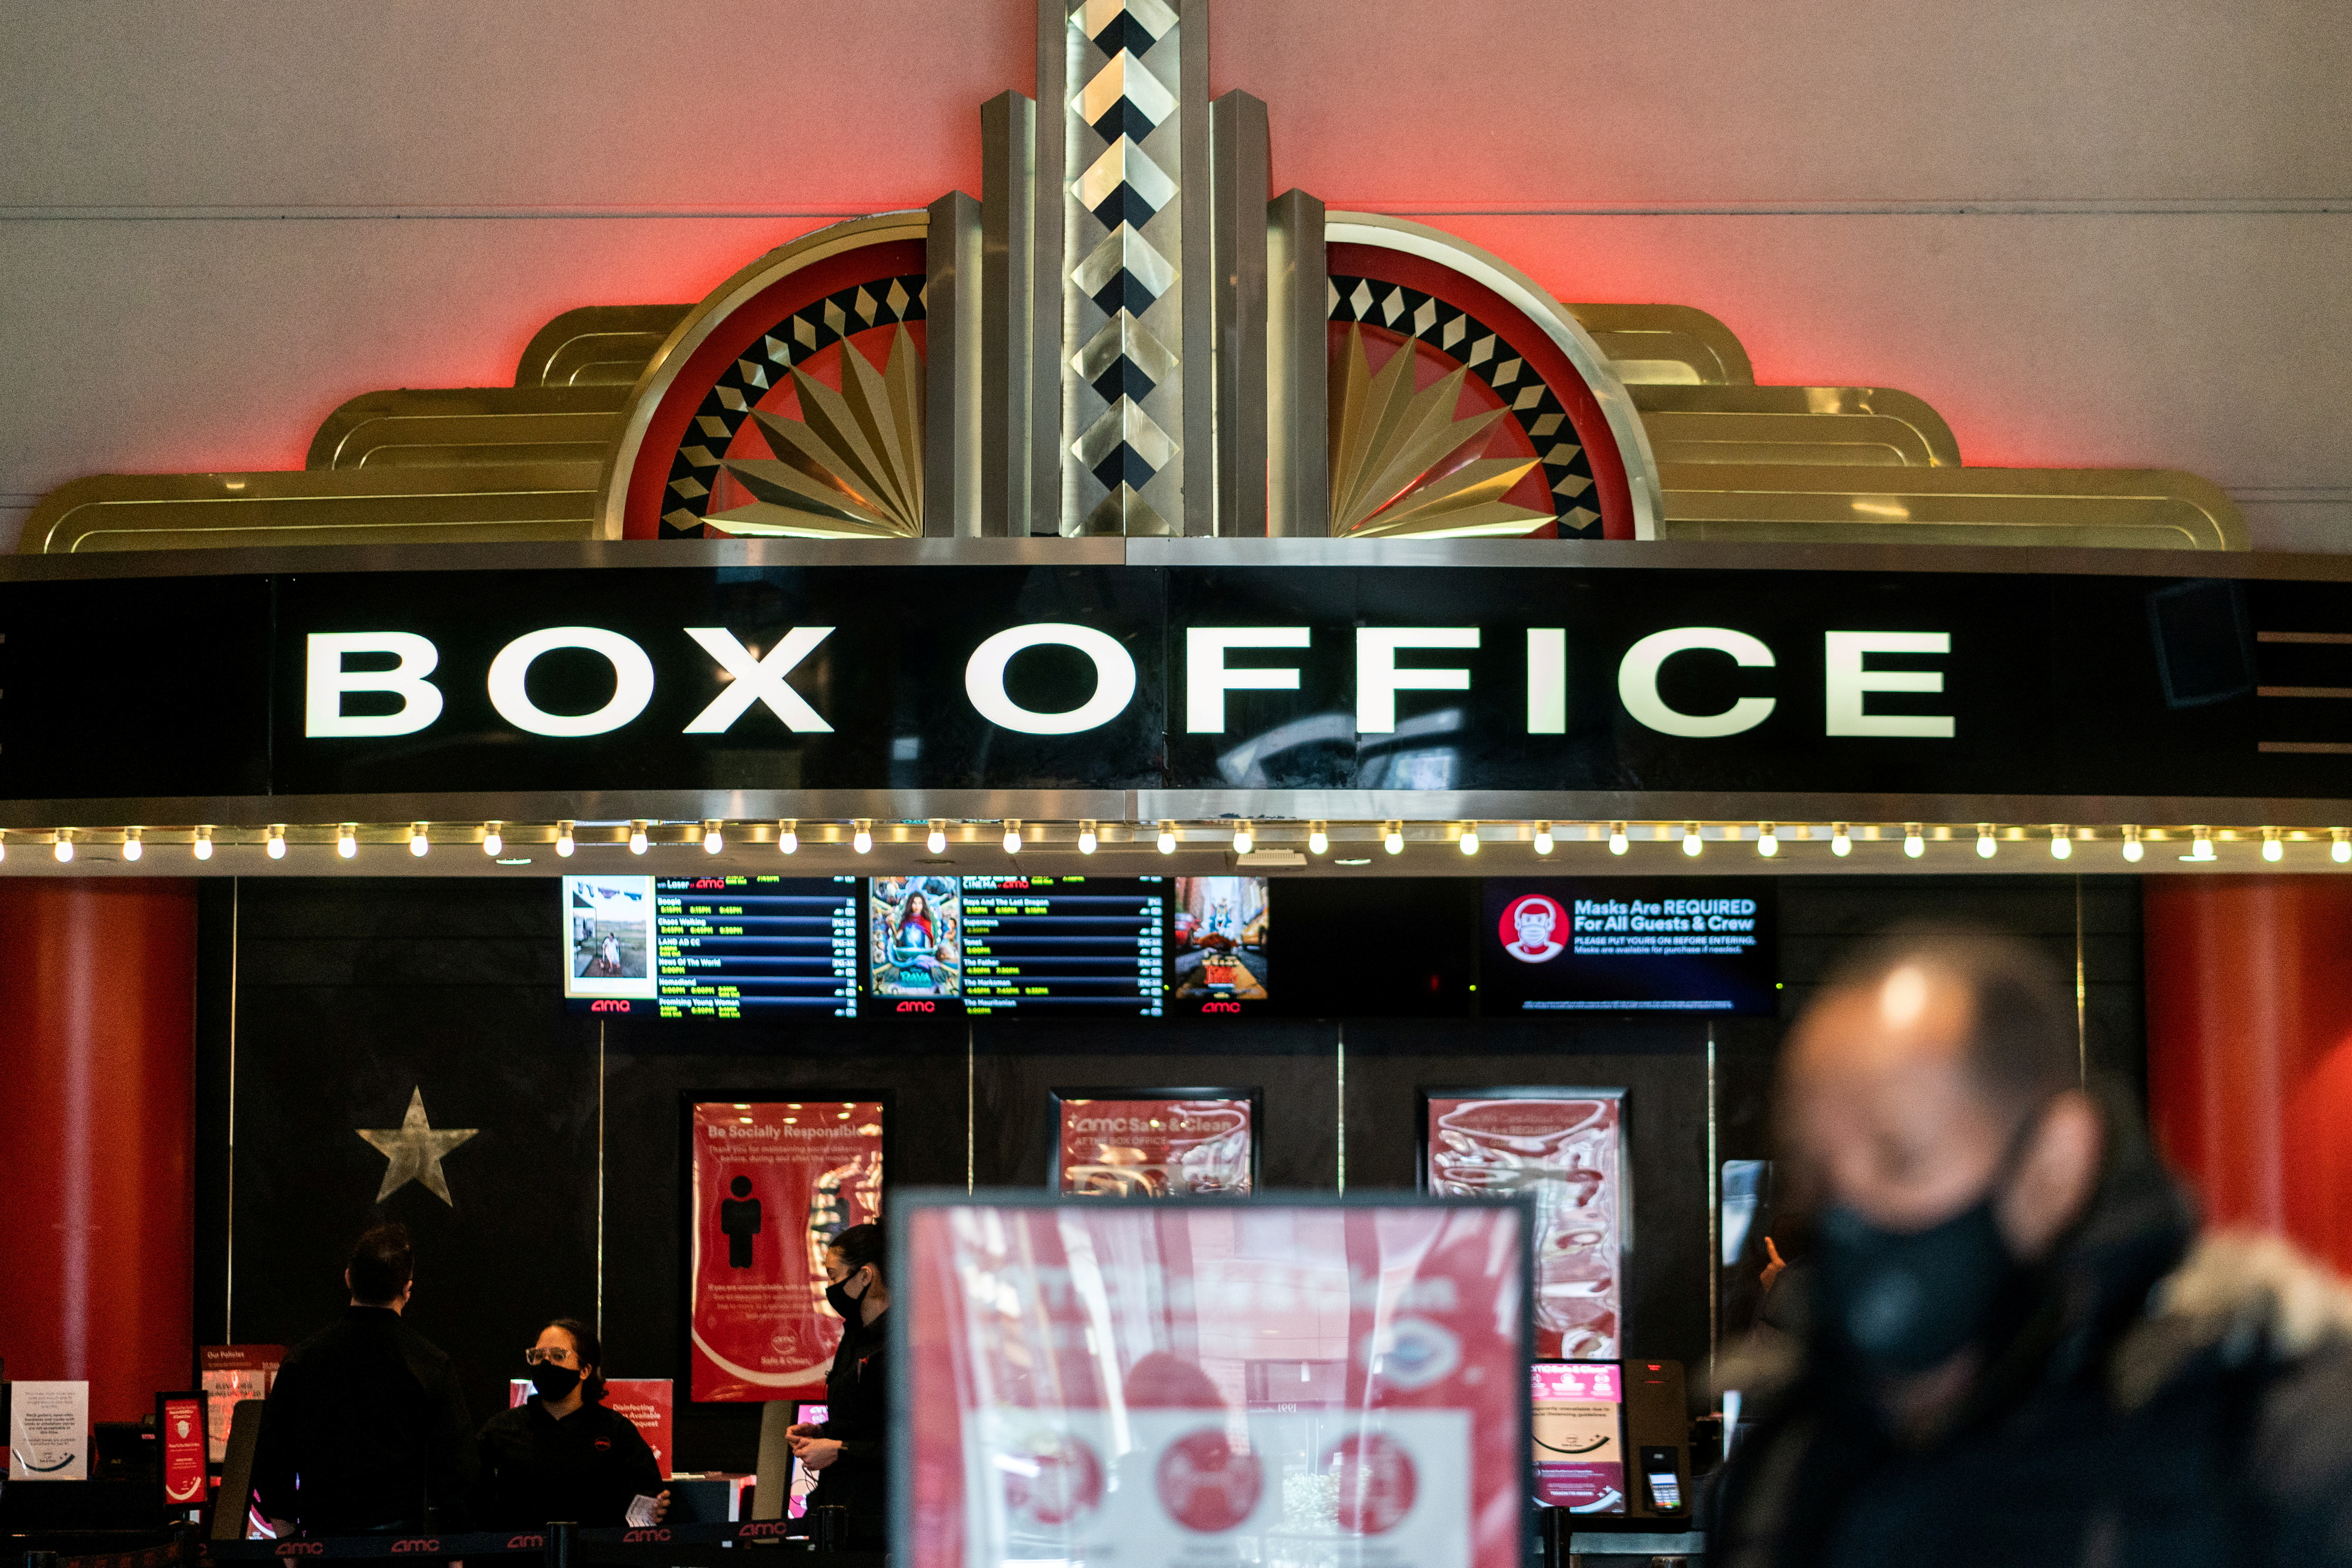 Movie theatres opening in New York City